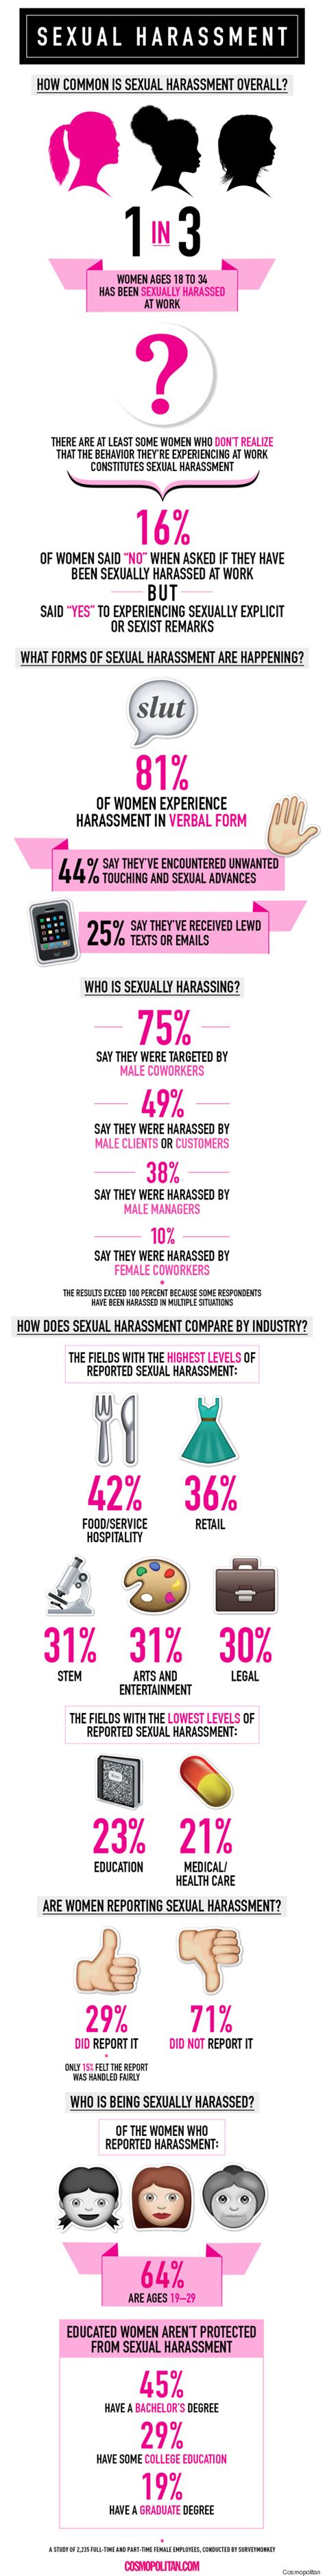 1 in 3 women has been sexually harassed at work according to survey